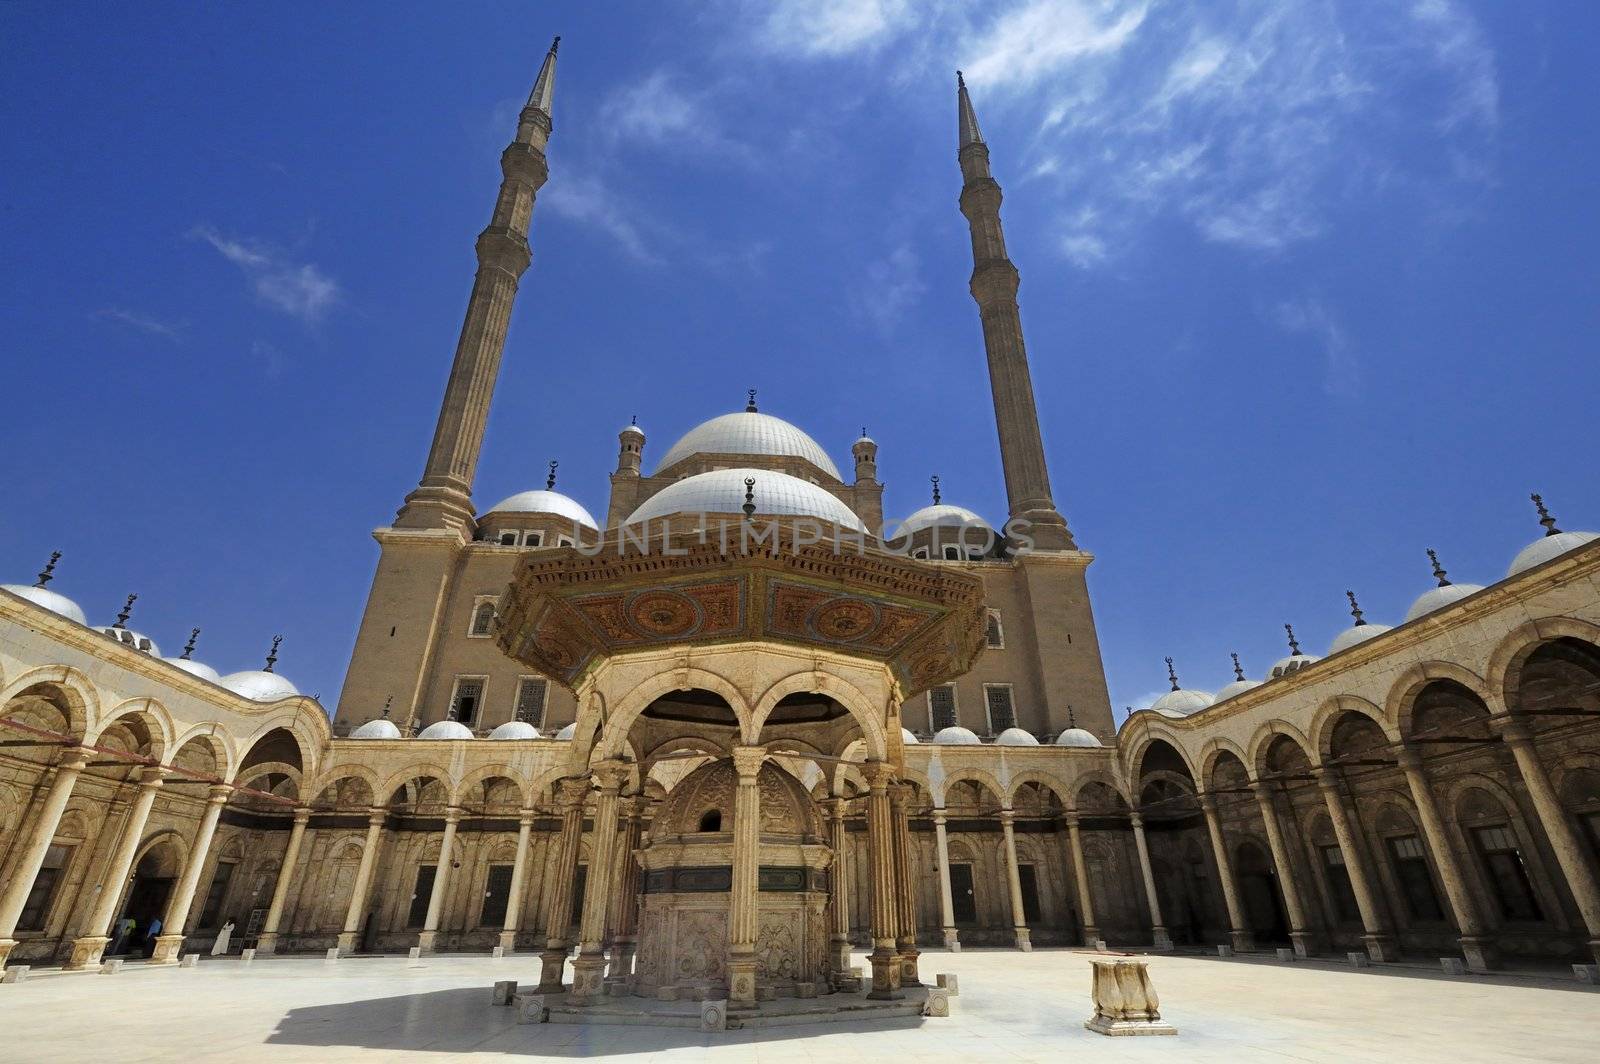 The Mosque of Muhammad Ali Pasha or Alabaster Mosque is a Ottoman mosque situated in the Saladin Citadel of Cairo in Egypt and commissioned by Muhammad Ali Pasha between 1830 and 1848.